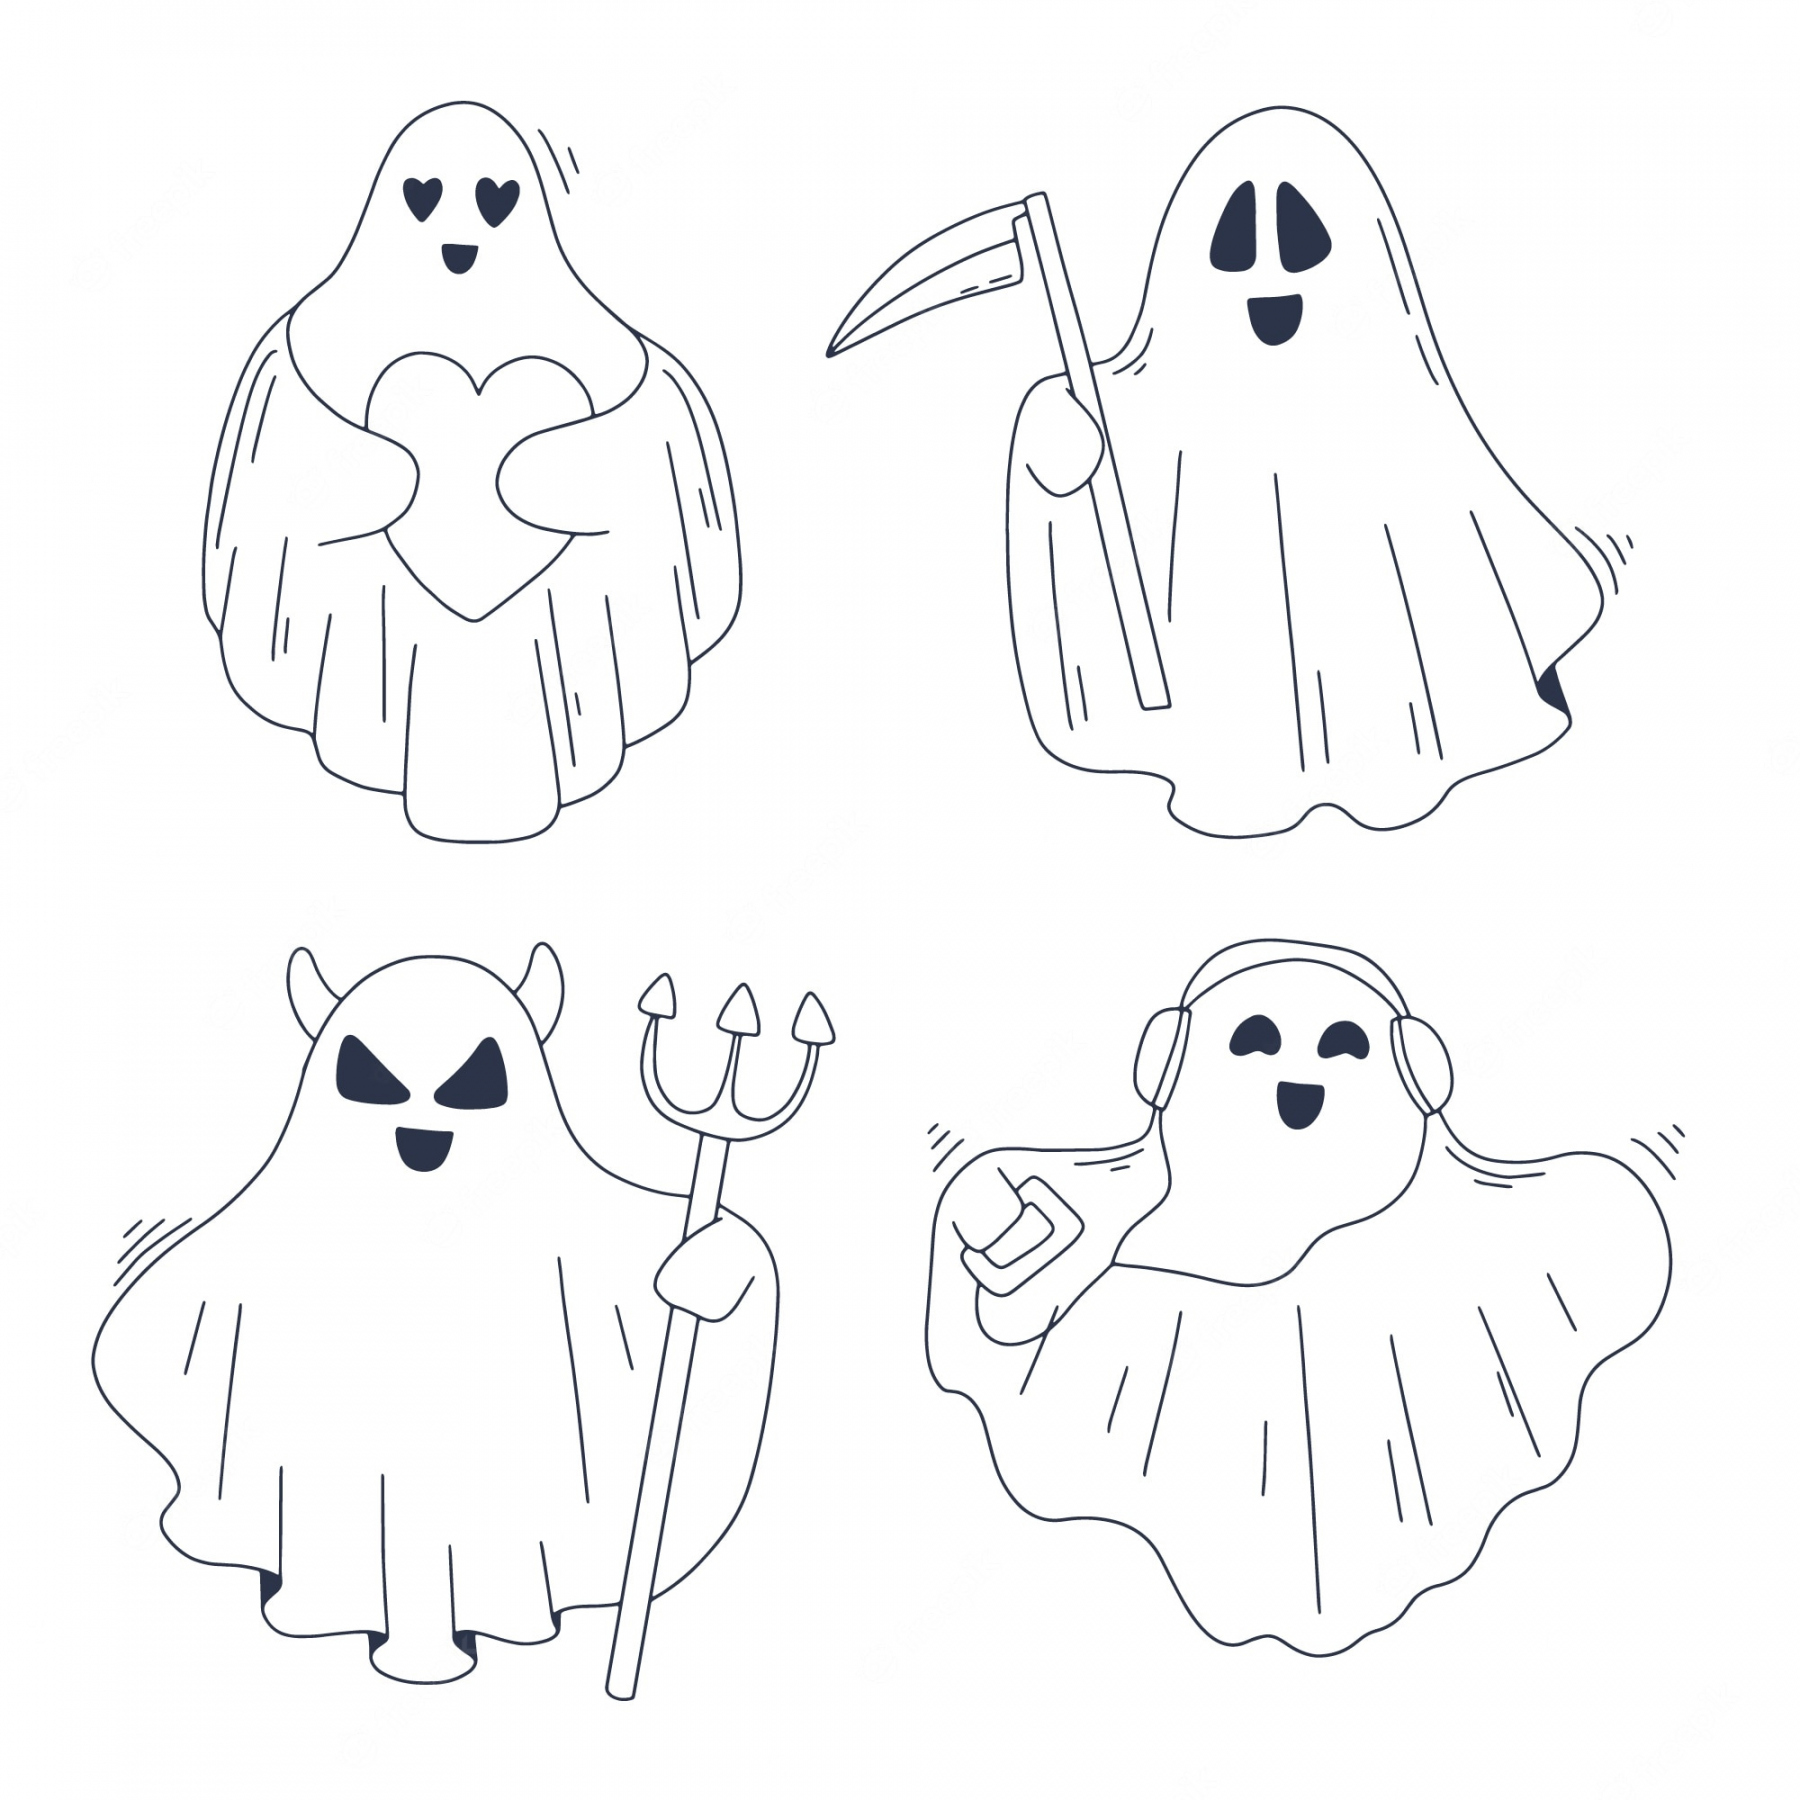 Ghost Outline Images - Free Download on Freepik - FREE Printables - Ghost Outline